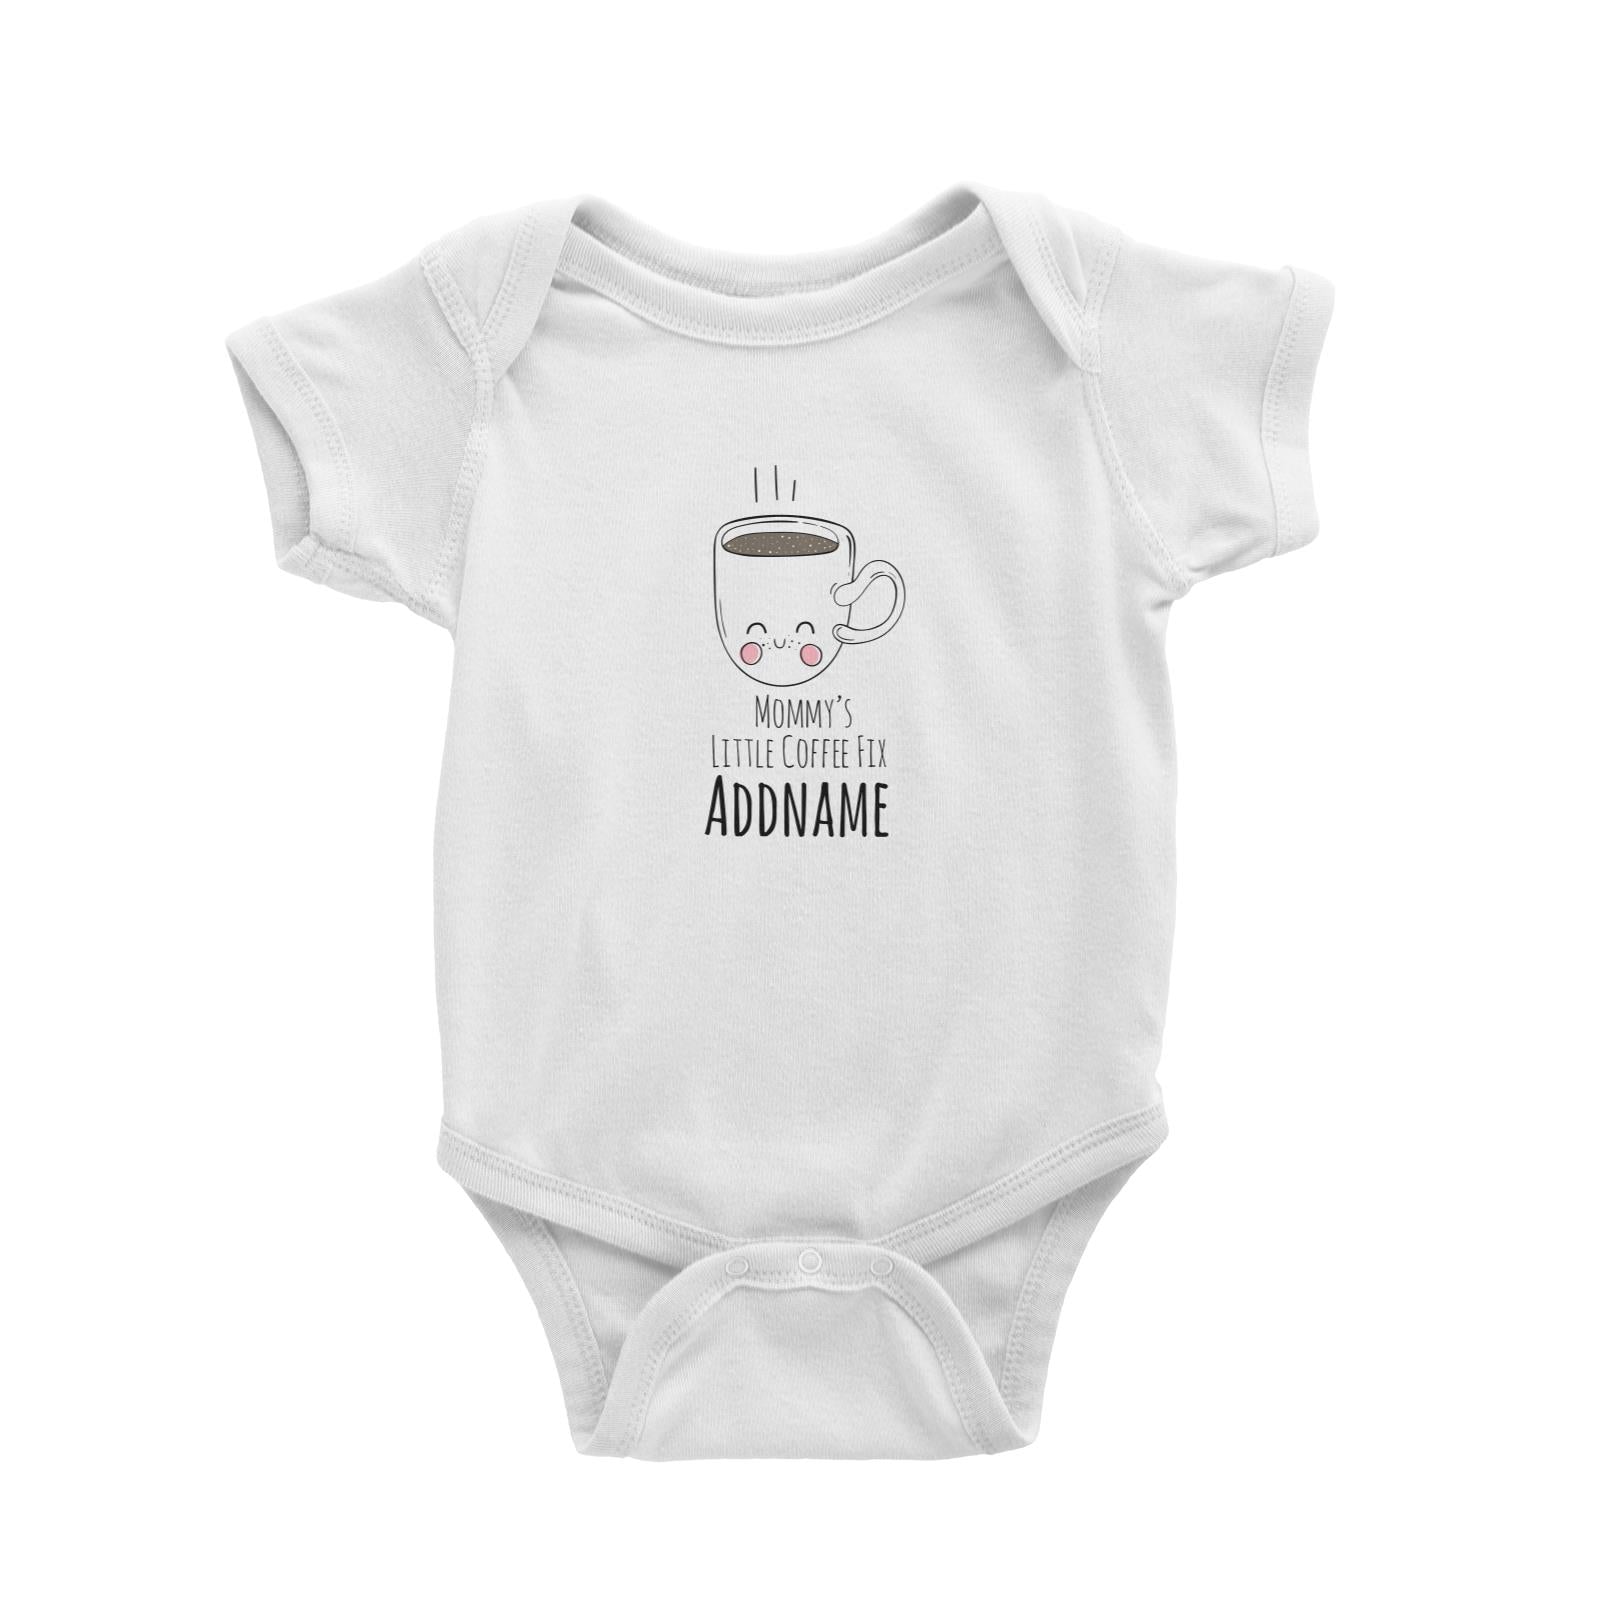 Drawn Sweet Snacks Mommy's Little Coffee Addname Baby Romper